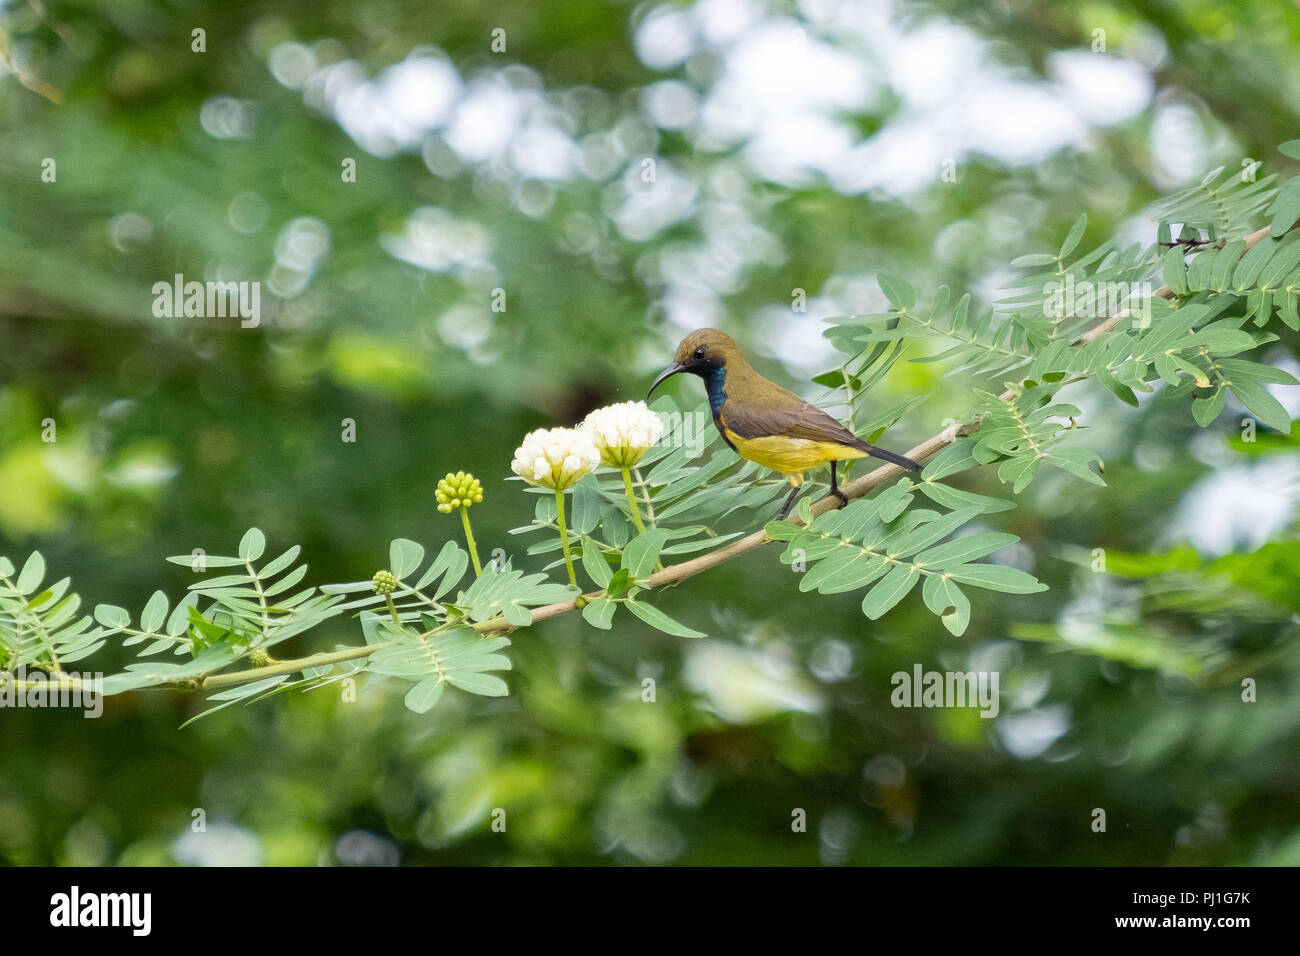 Sunbirds are hanging on branches. Stock Photo